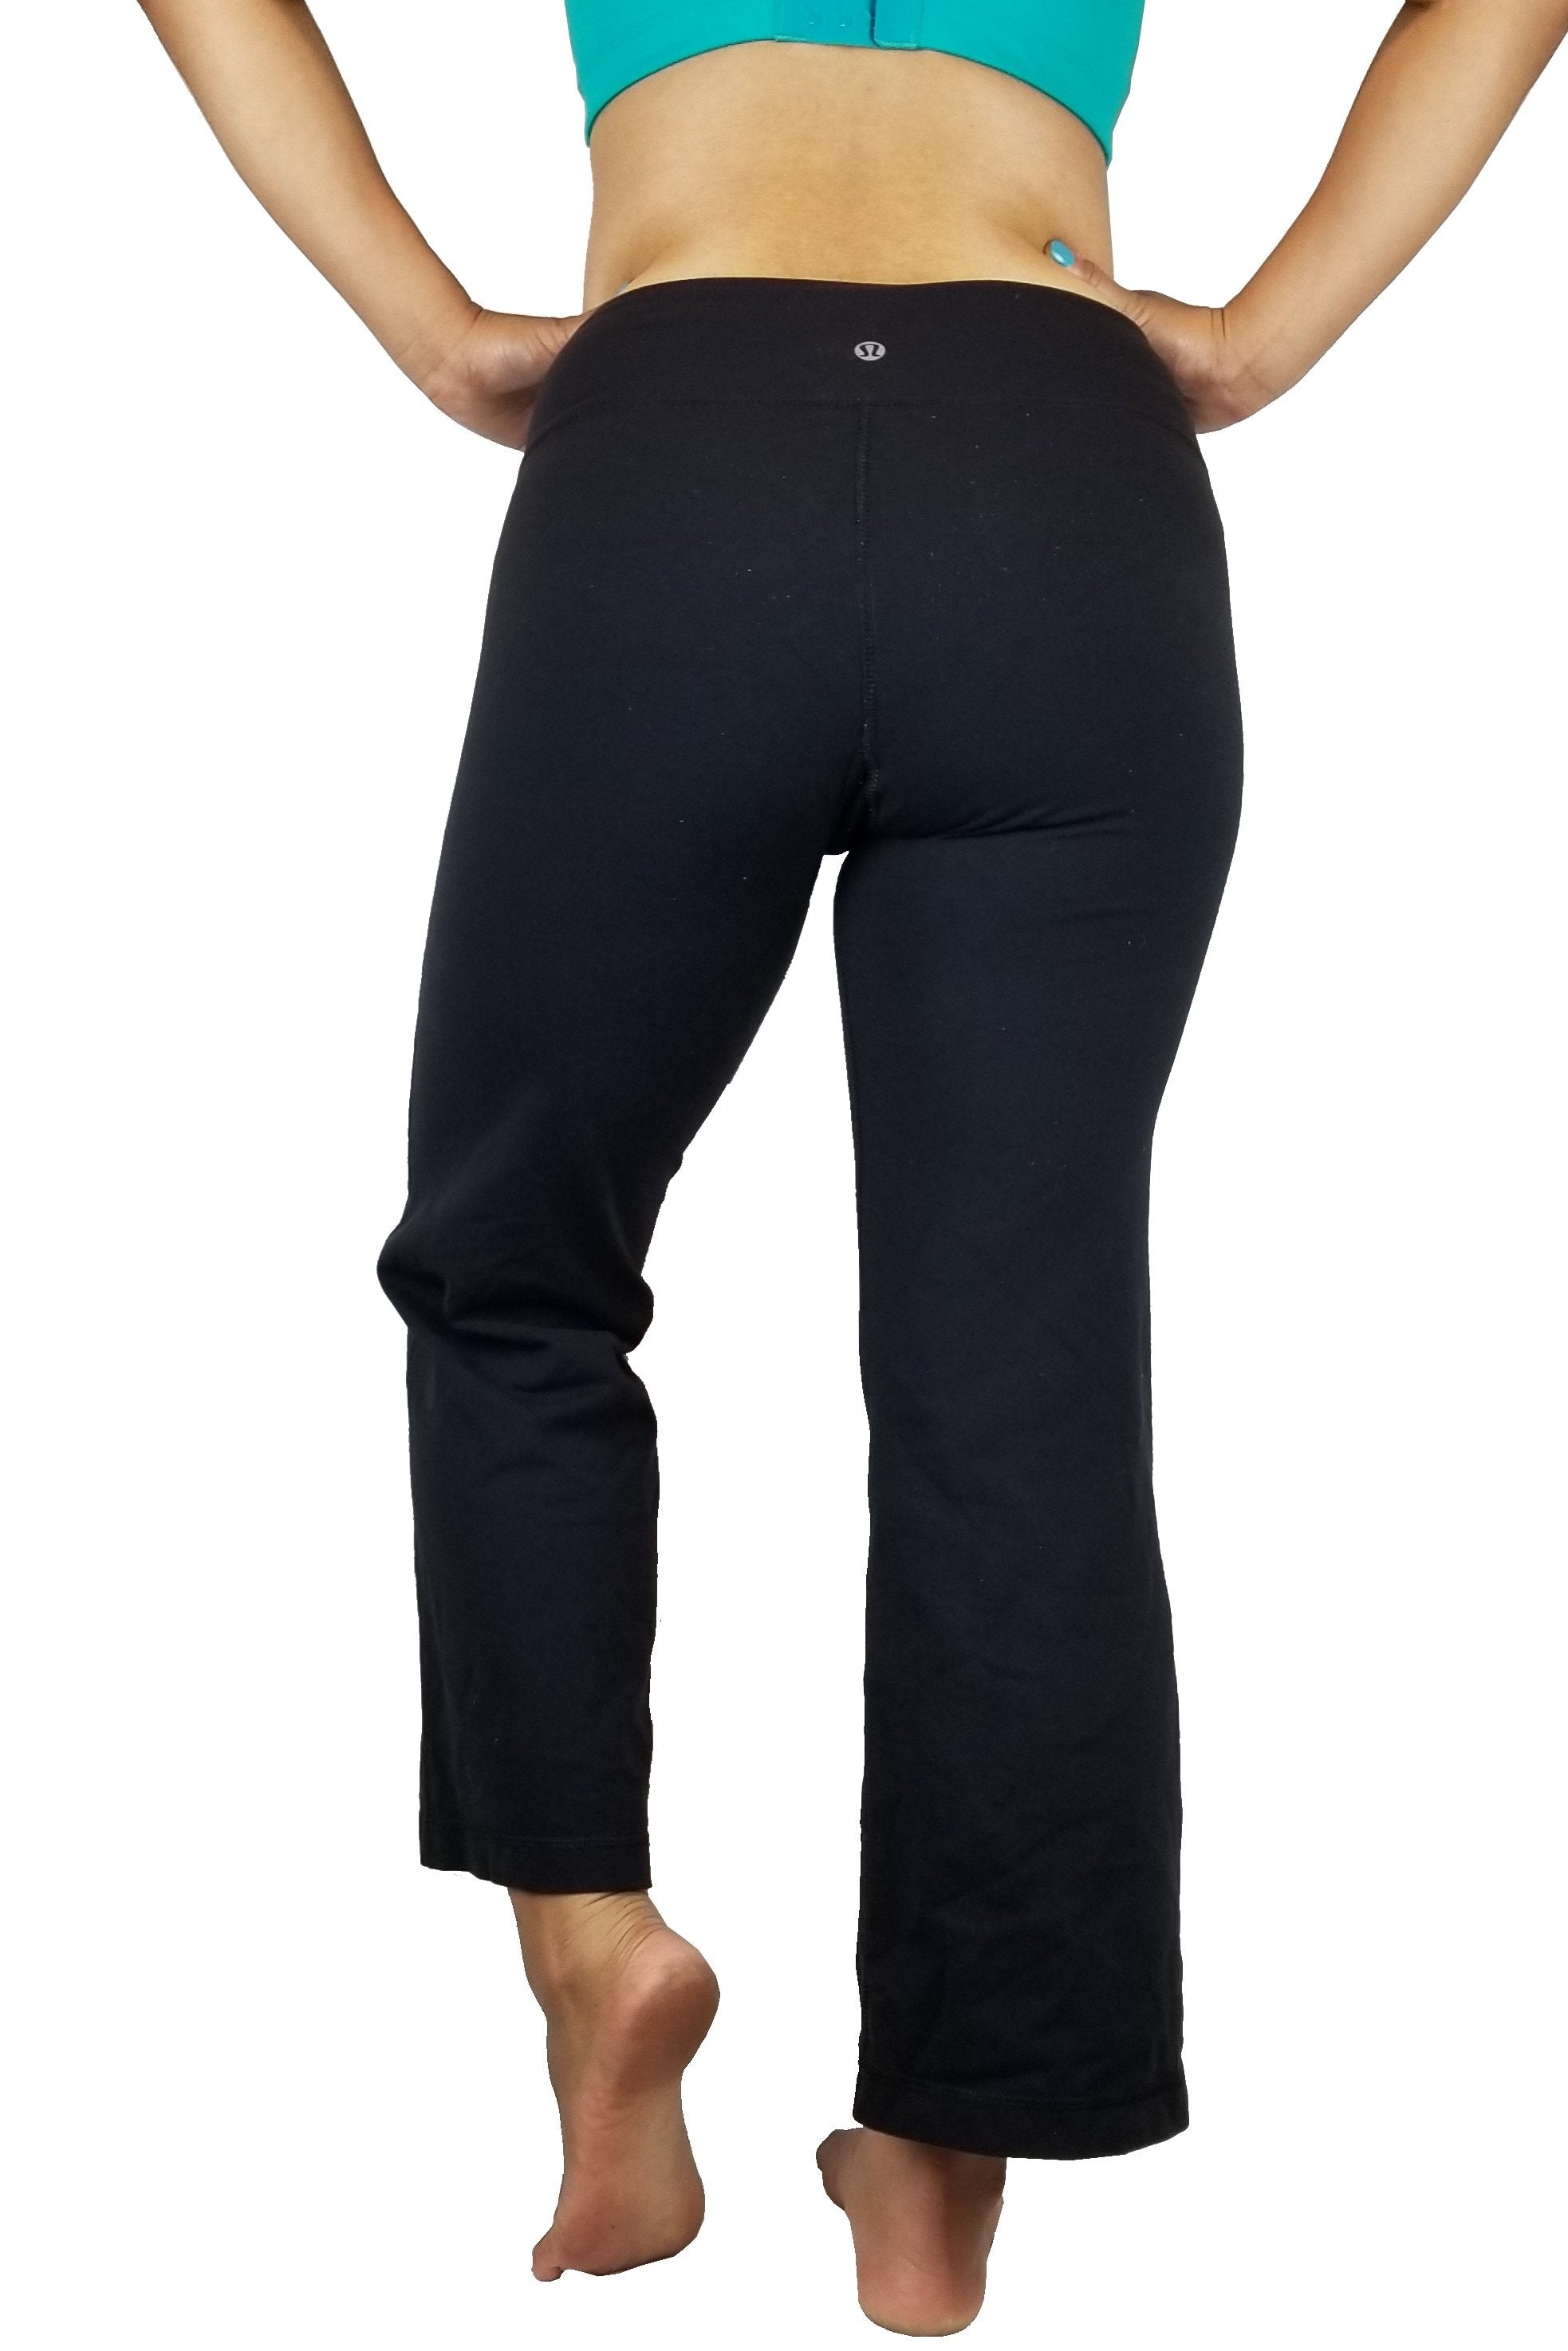 Lululemon Flare yoga pants, Flare design for comfort and breathability. Less of a Vancouver street wear? Lululemon size 4. https://info.lululemon.com/help/size-chart, Pink, Nylon, Lycra, and Spandex, Yoga, yoga pants, women's athletic wear, women's work out clothes, women's comfortable pants, fitness, fit